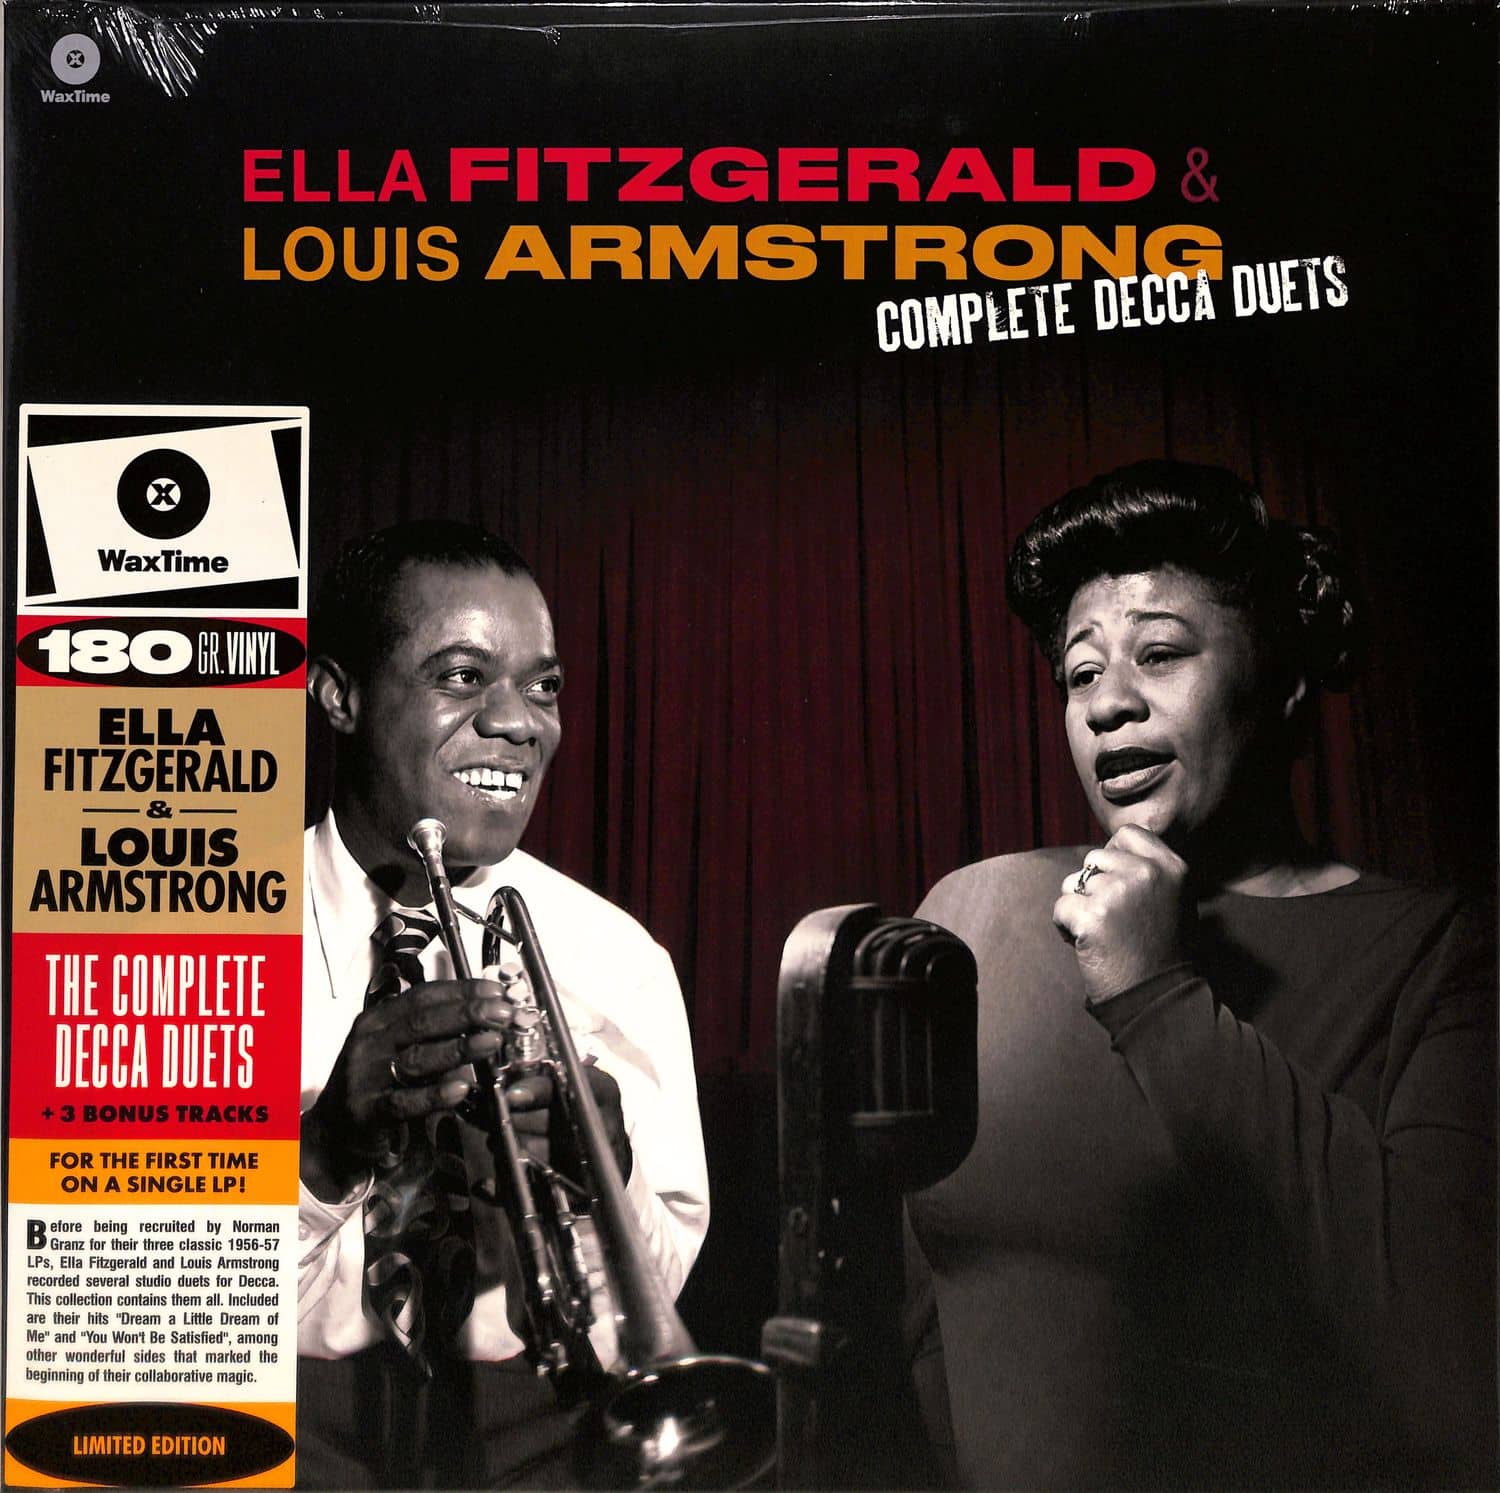 Ella Fitzgerald & Louis Armstrong - THE COMPLETE DECCA DUETS  